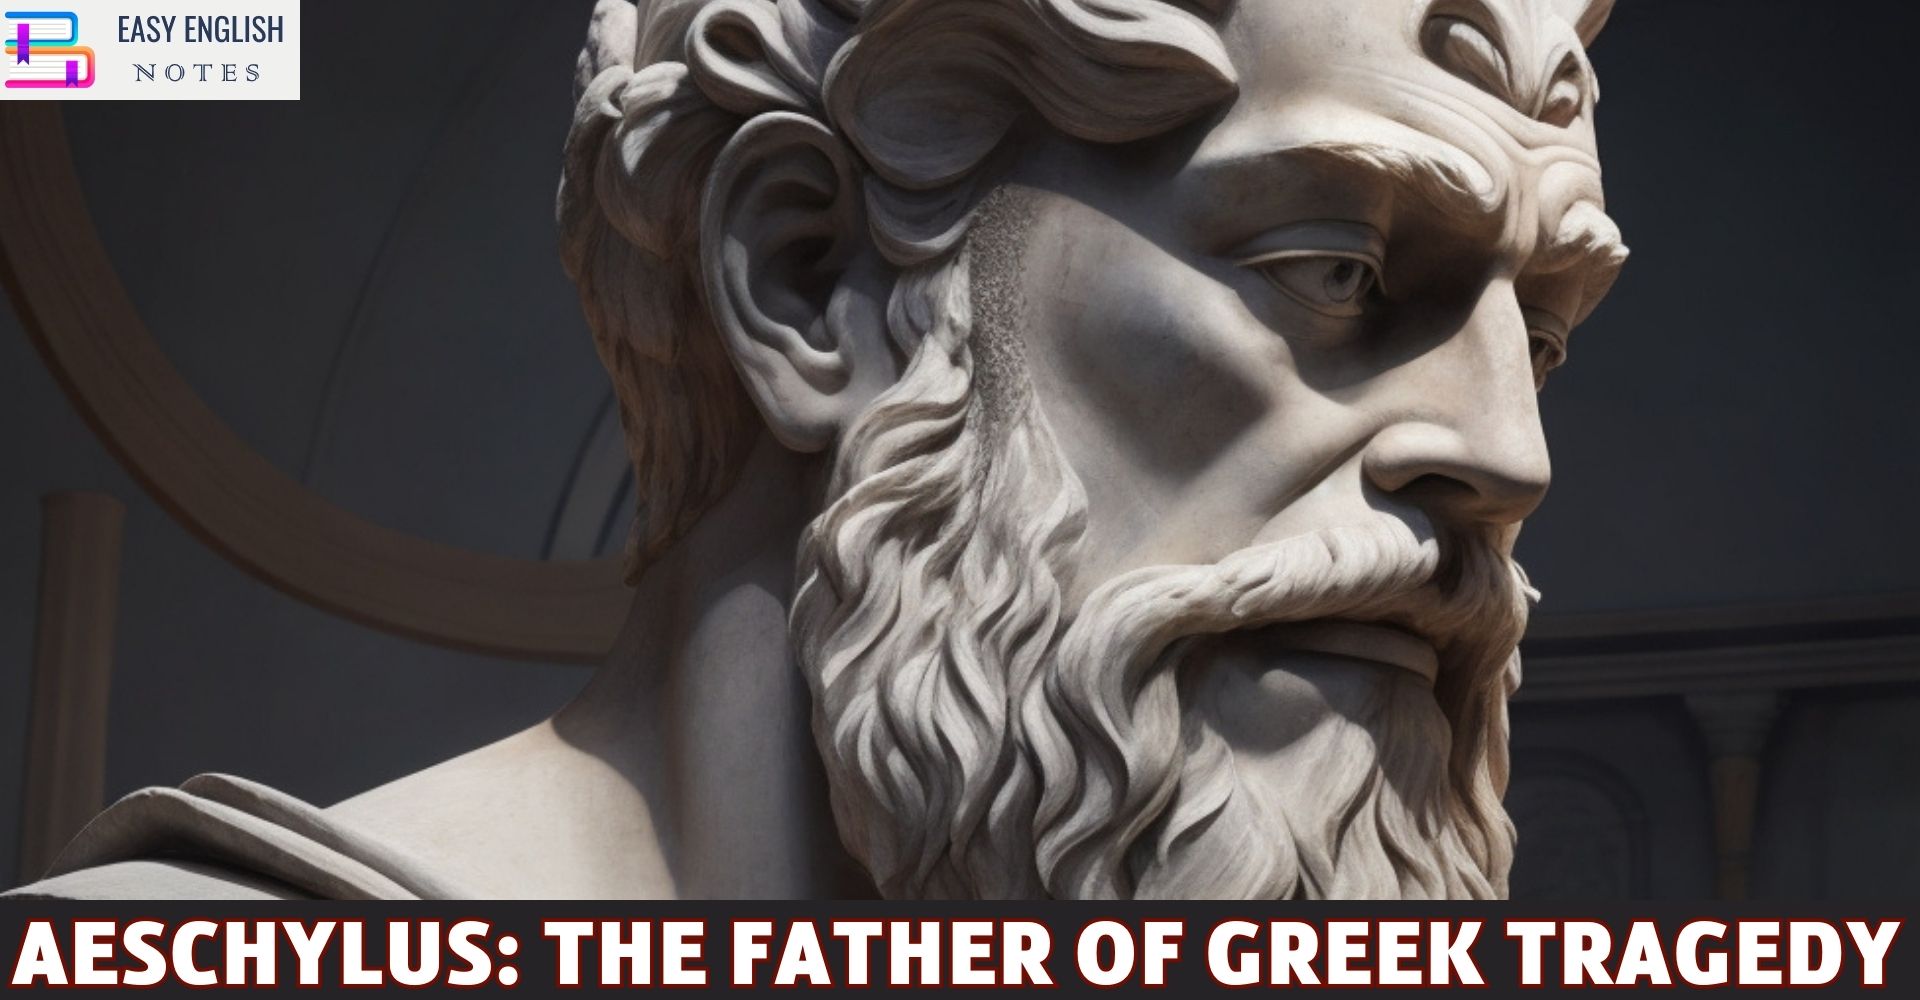 Aeschylus: The Father of Greek Tragedy